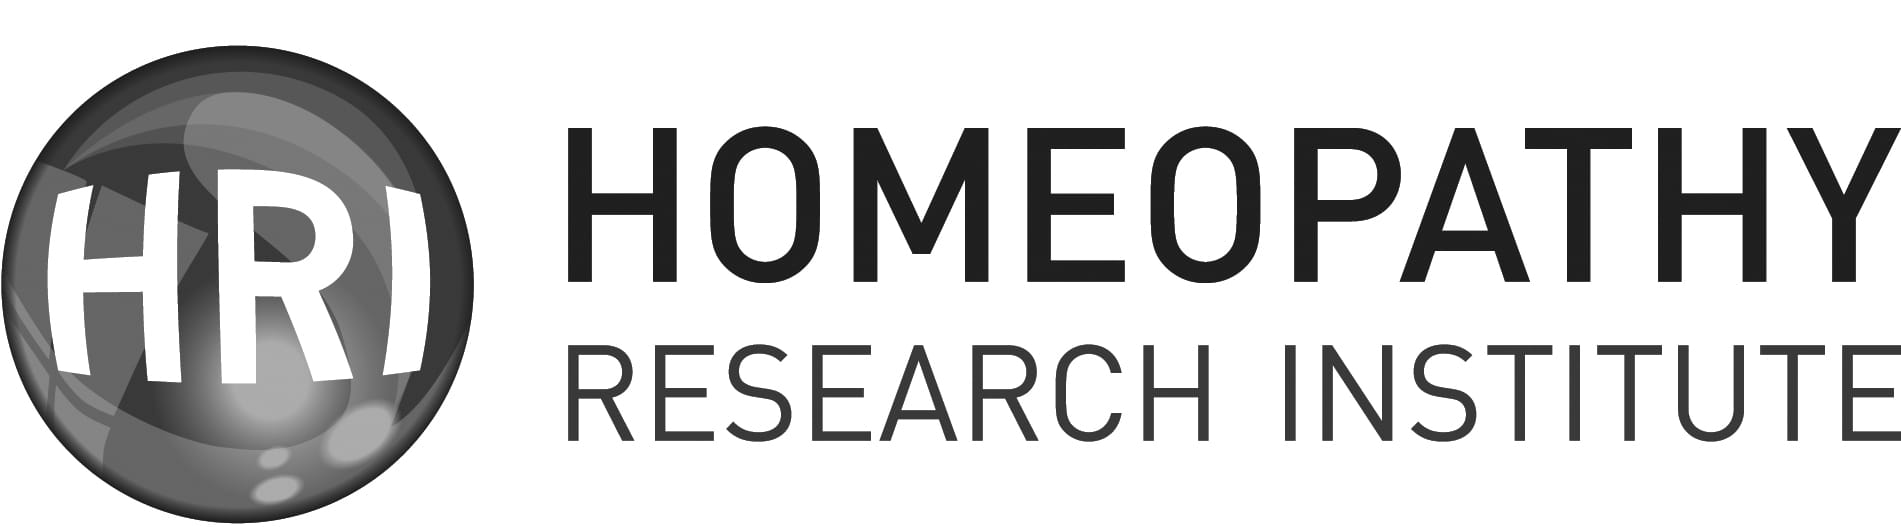 Homeopathy Research institute